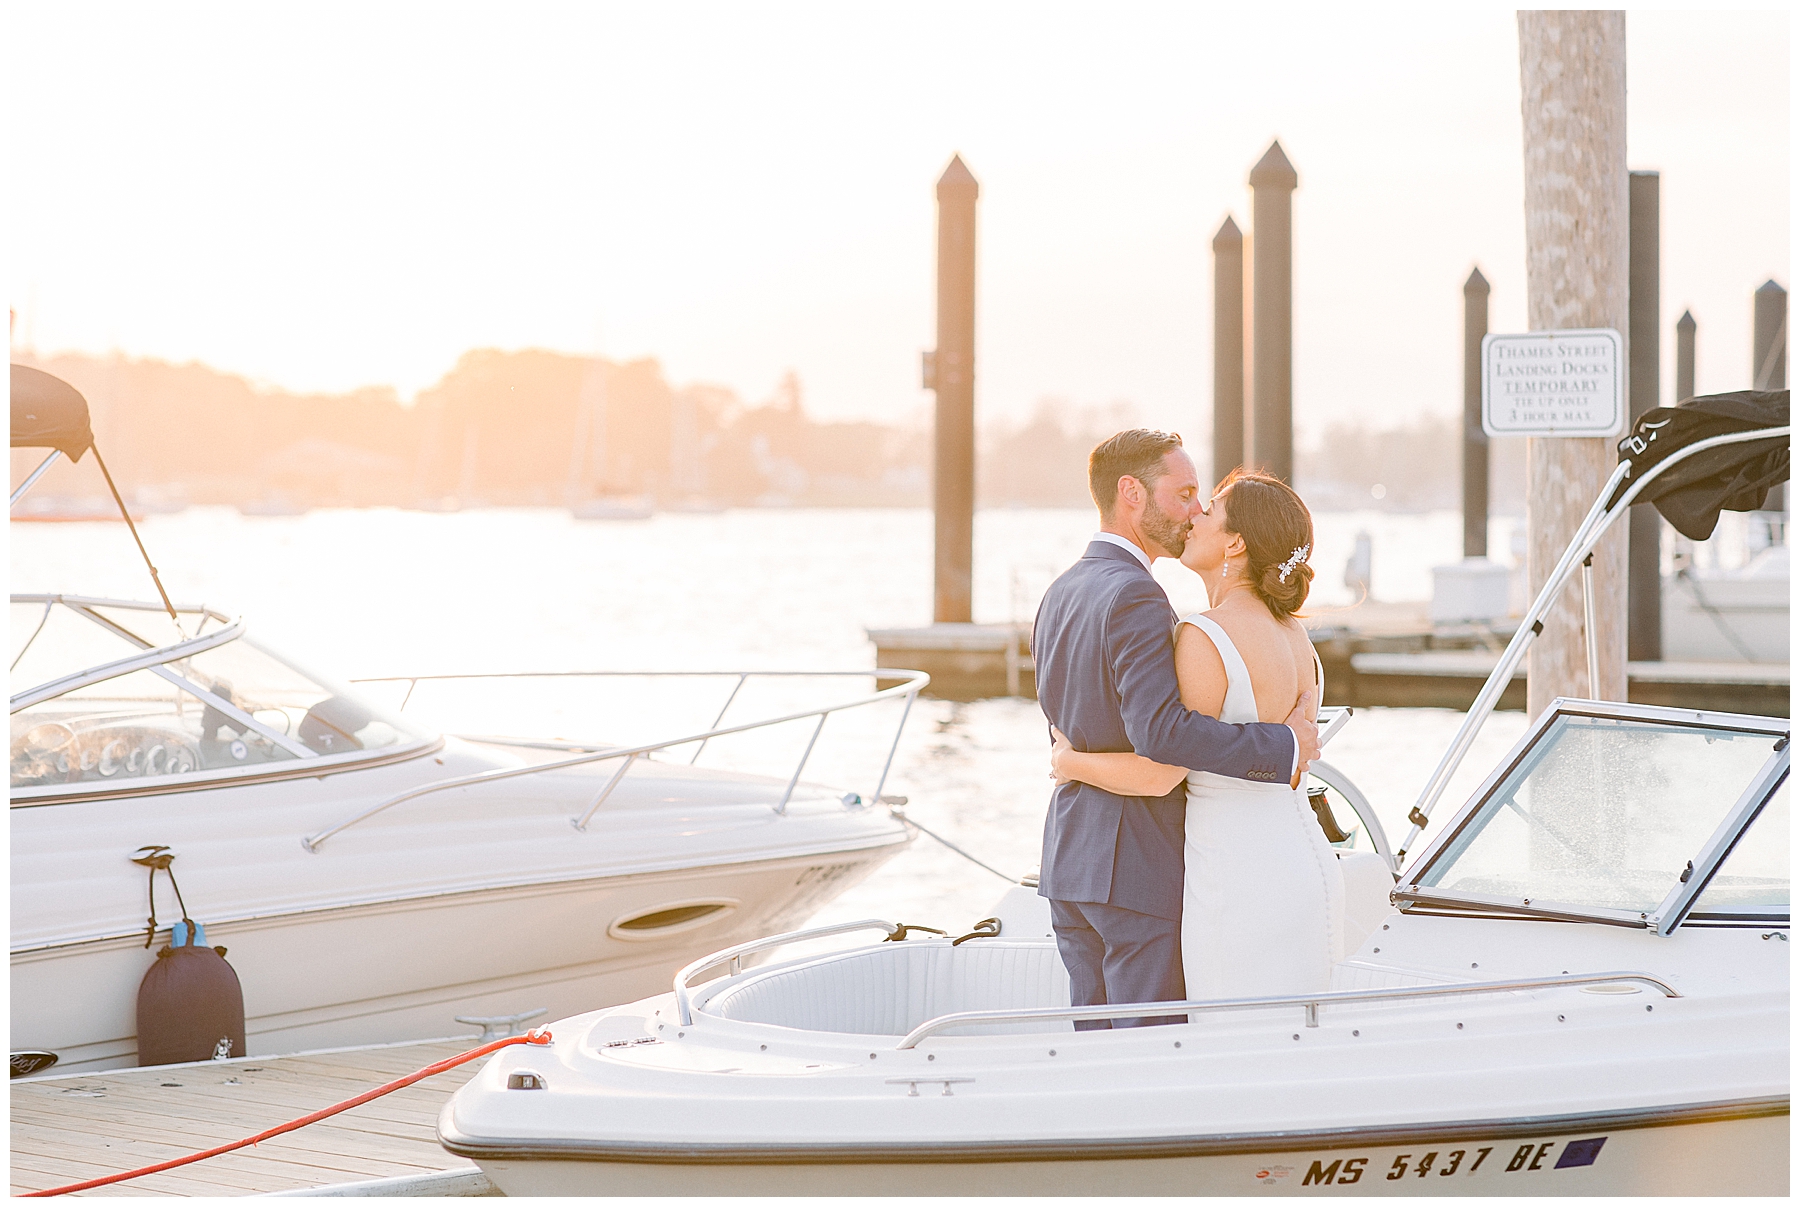 newlyweds kiss at sunset on a boat in the RI harbor captured by Stephanie Berenson Photography